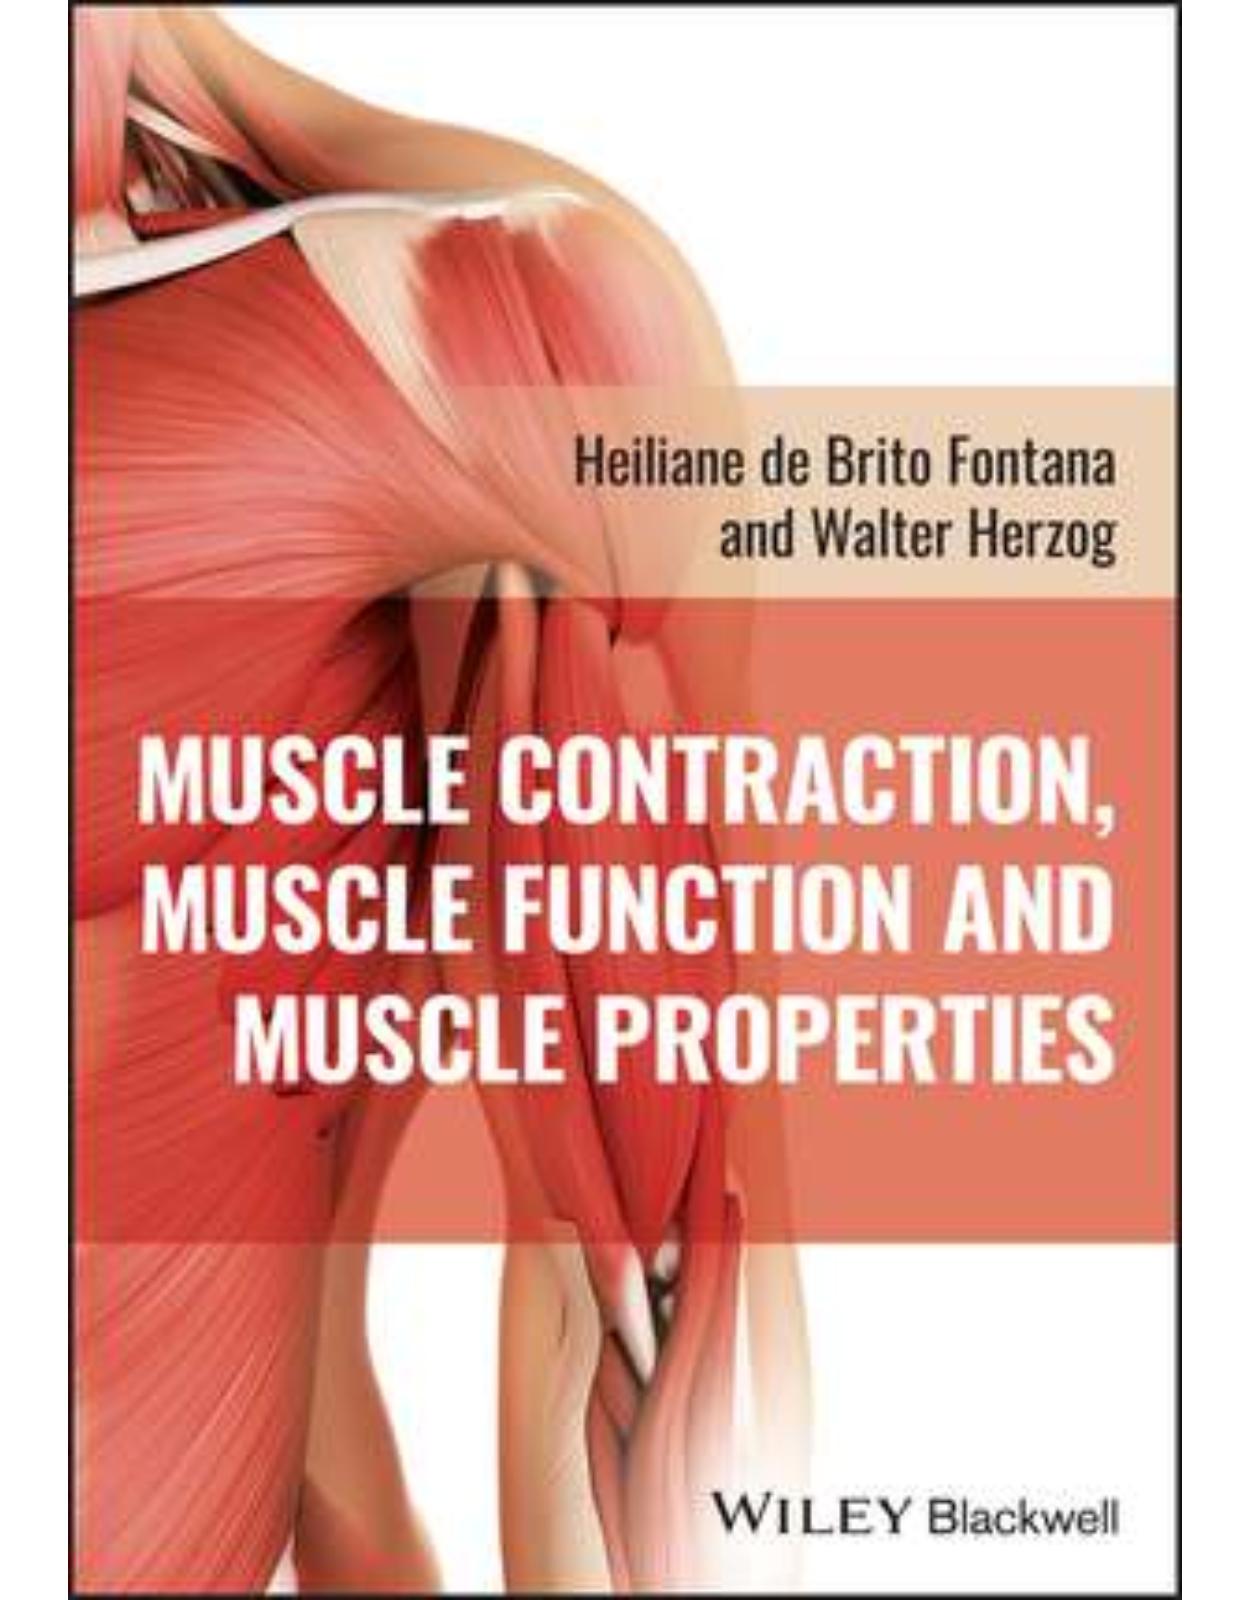 Muscle Contraction, Muscle Function and Muscle Pro perties